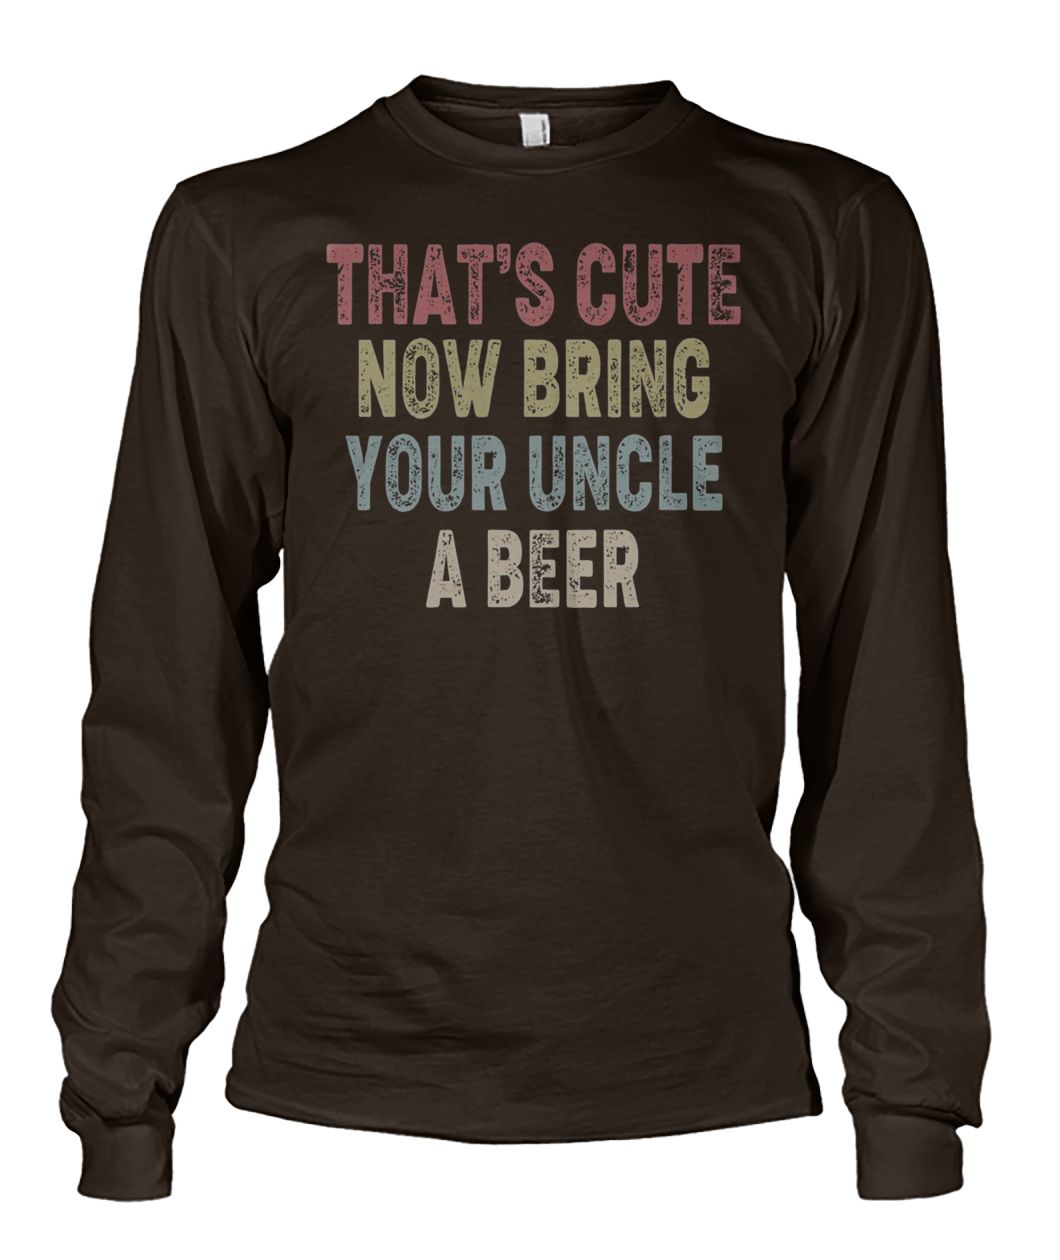 Vintage that's cute now bring your uncle a beer long sleeve